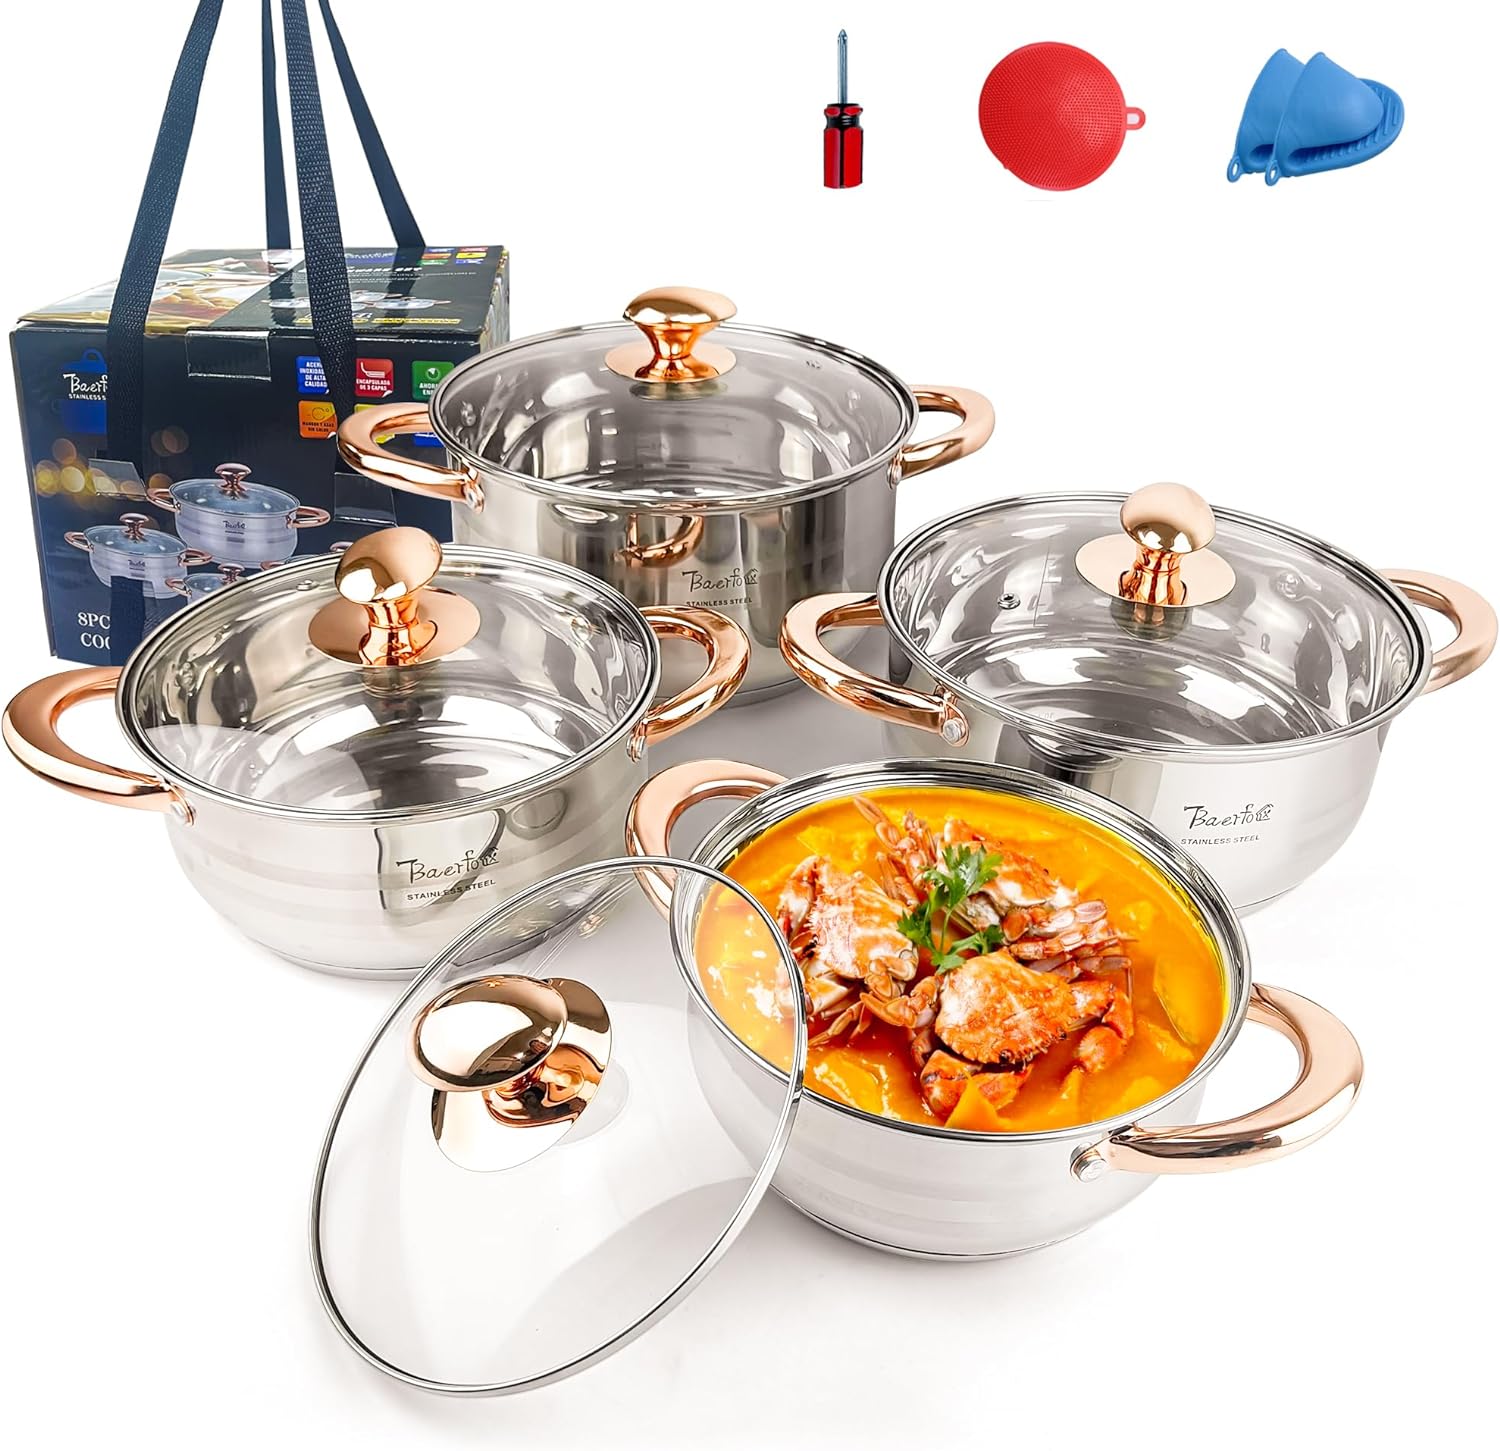 BAERFO Silver Pots and Pans Set with lids Review